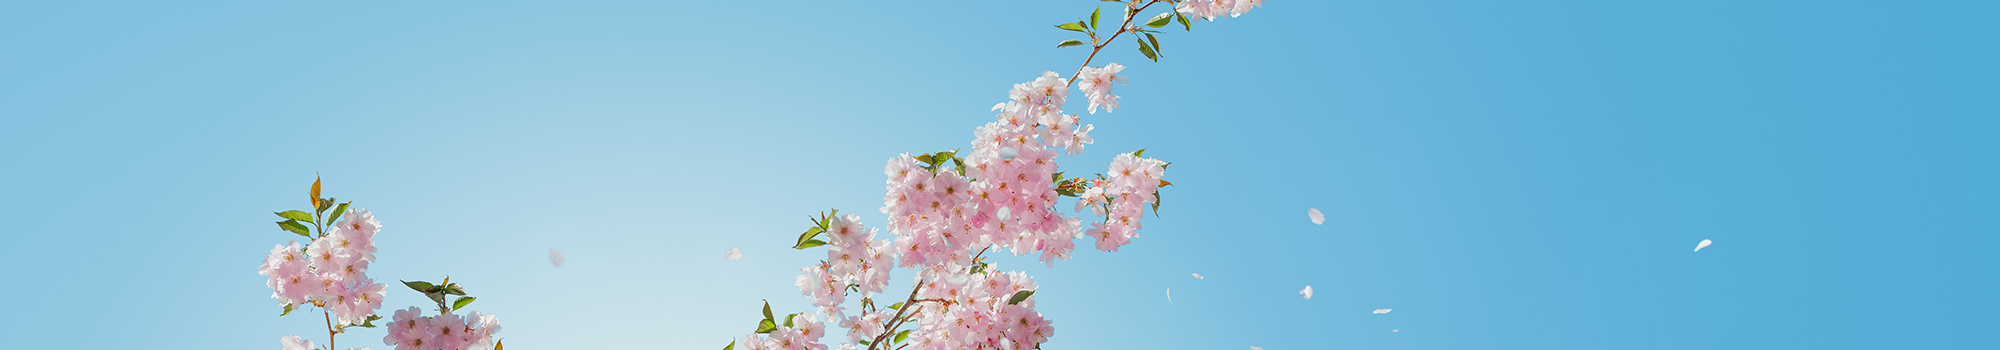 tree branches with pink flowers